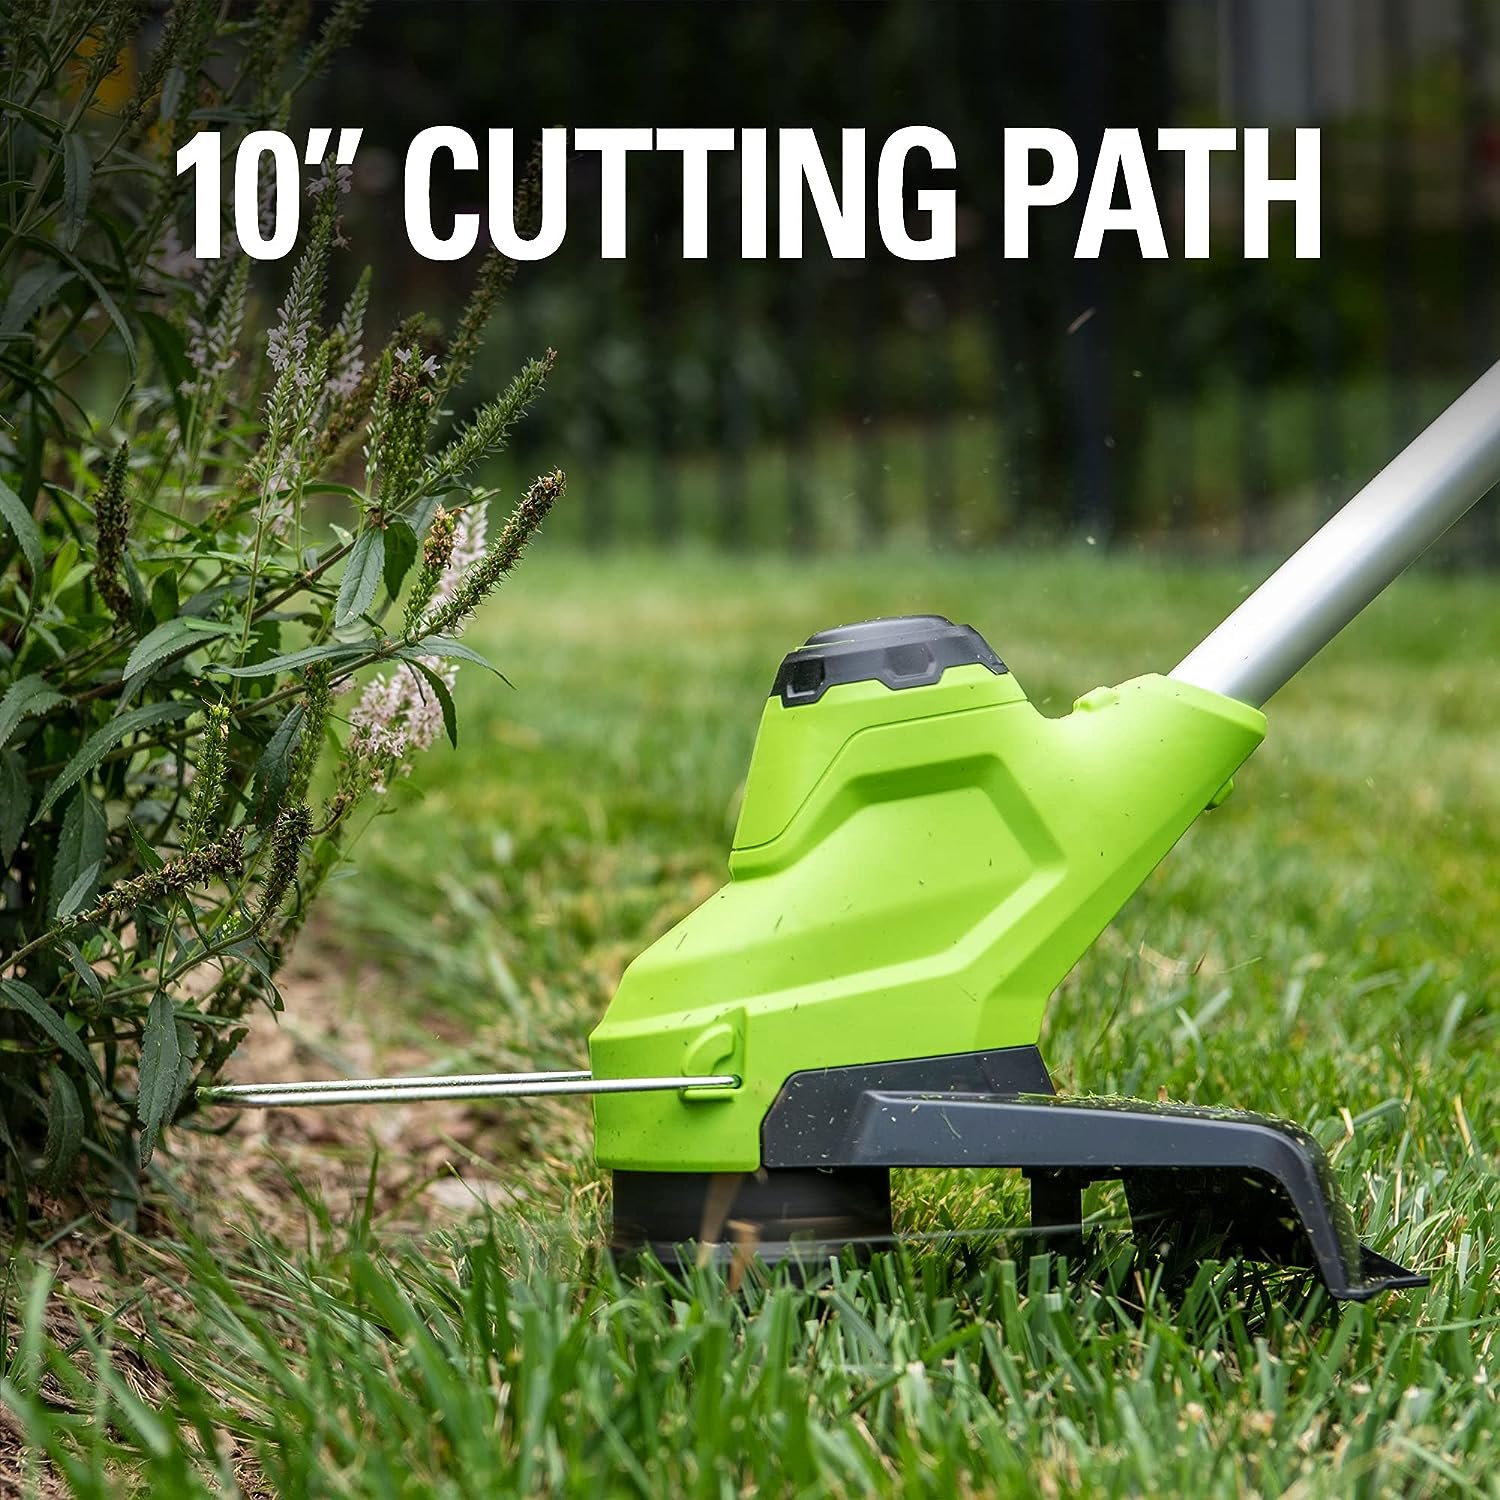 Greenworks TORQDRIVE String Trimmer review